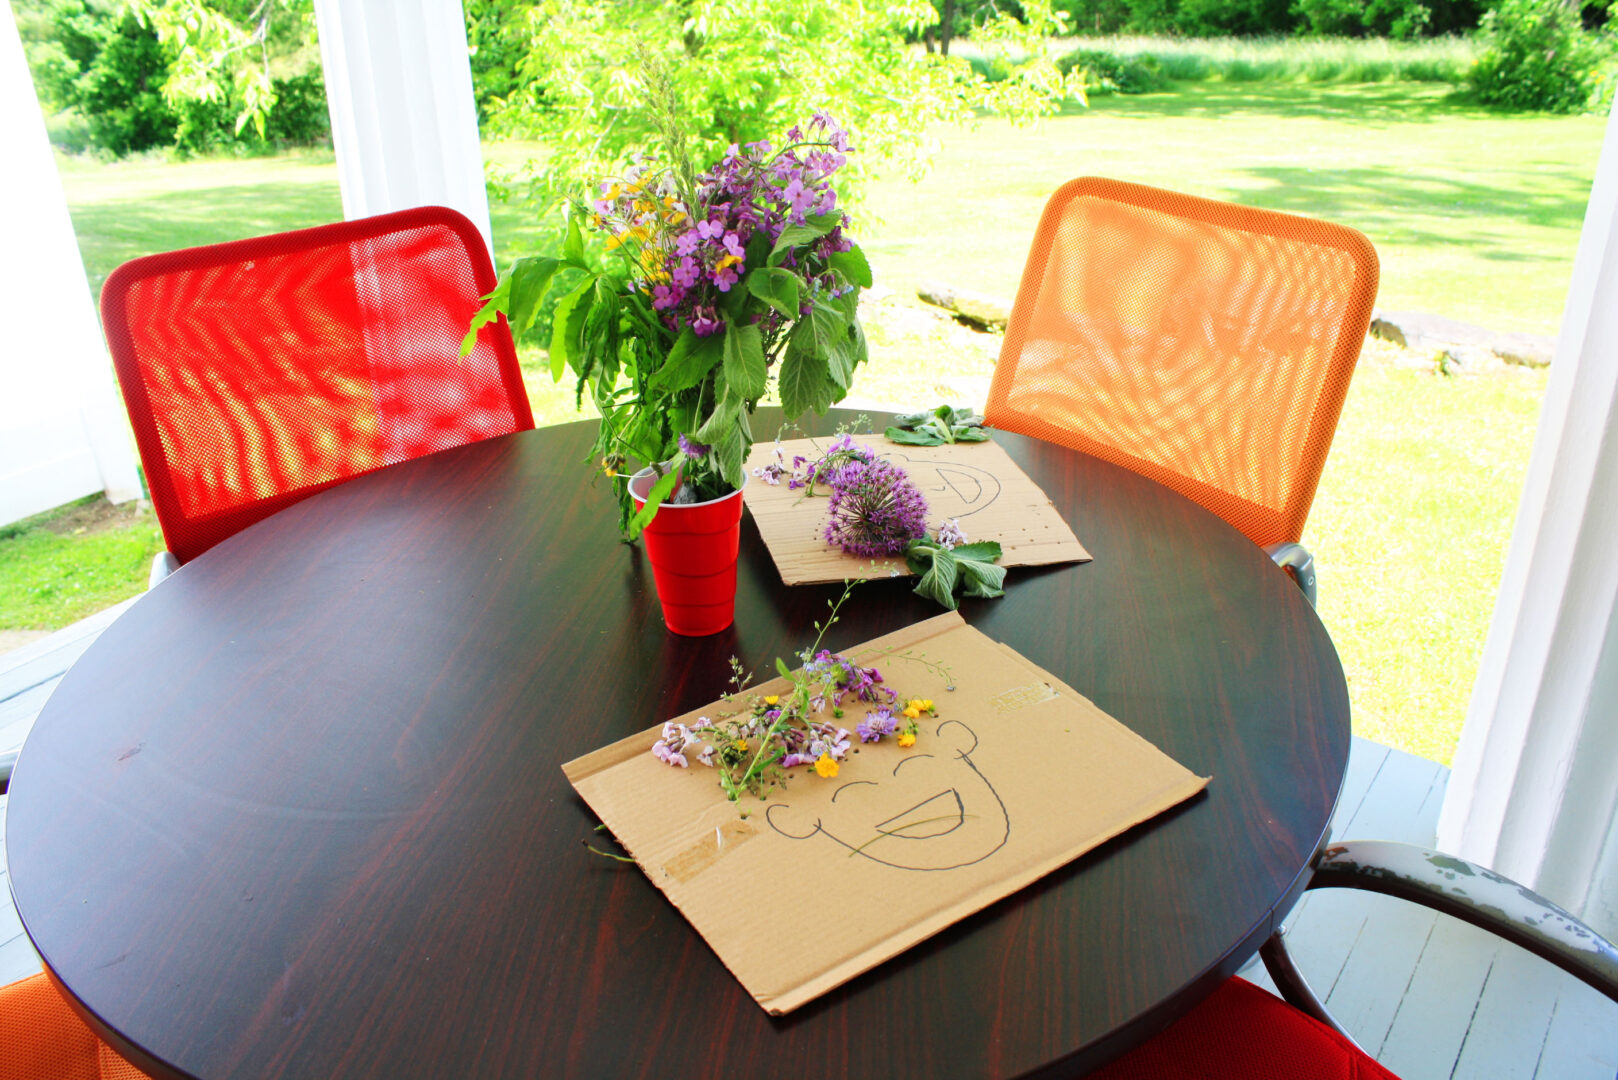 Sunny porch with a round table holds a flower arrangement in a red plastic cup and a cardboard artwork face with fresh flowers as hair.